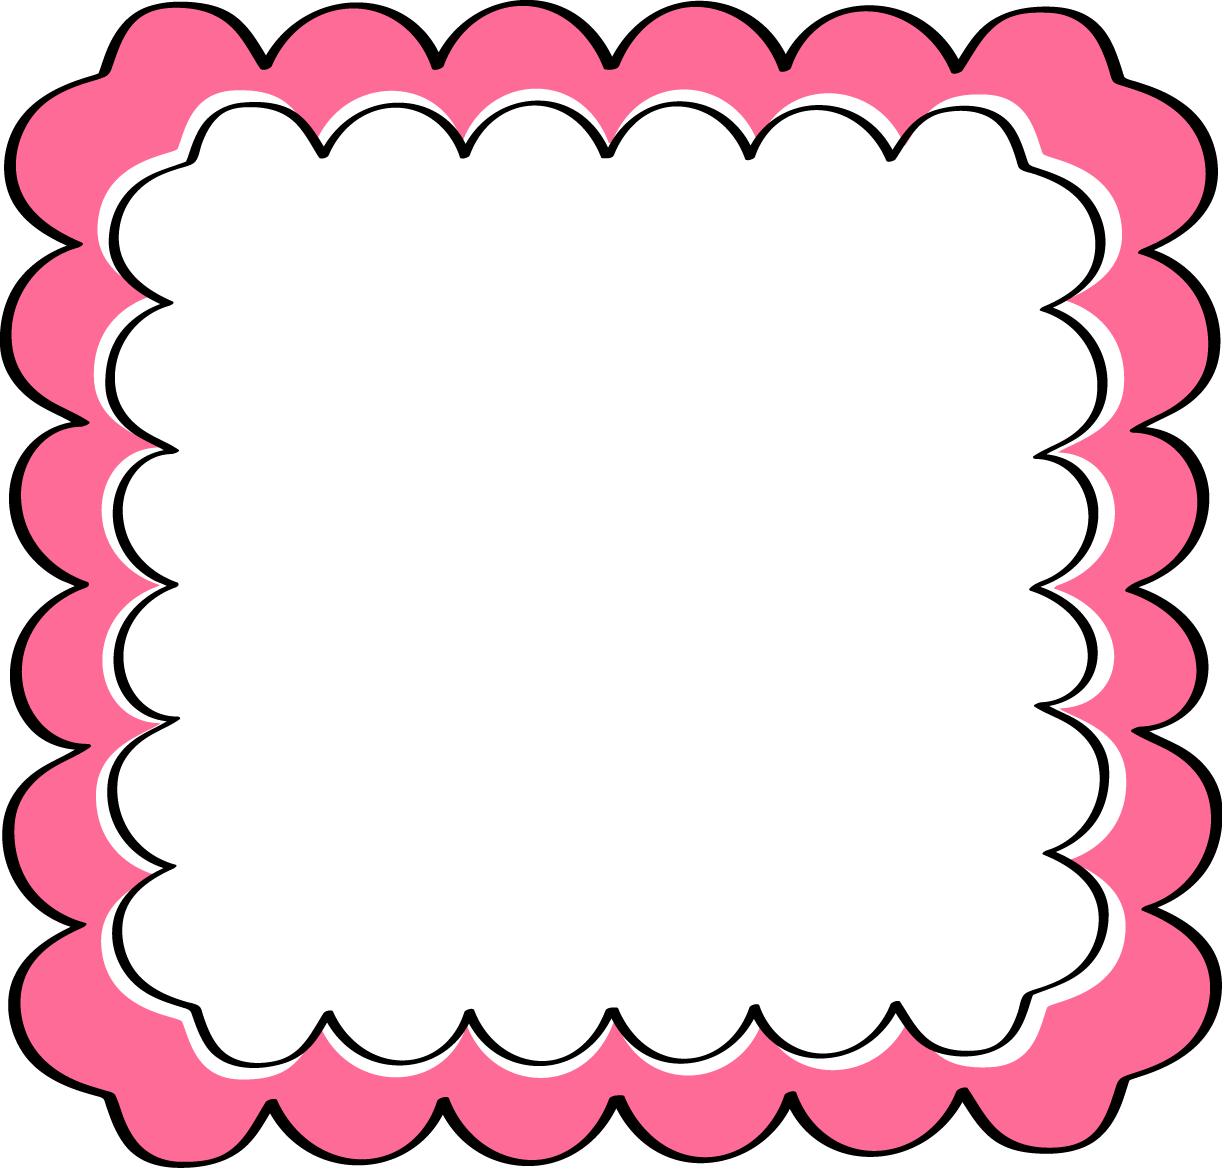 clipart of photo frames - photo #31